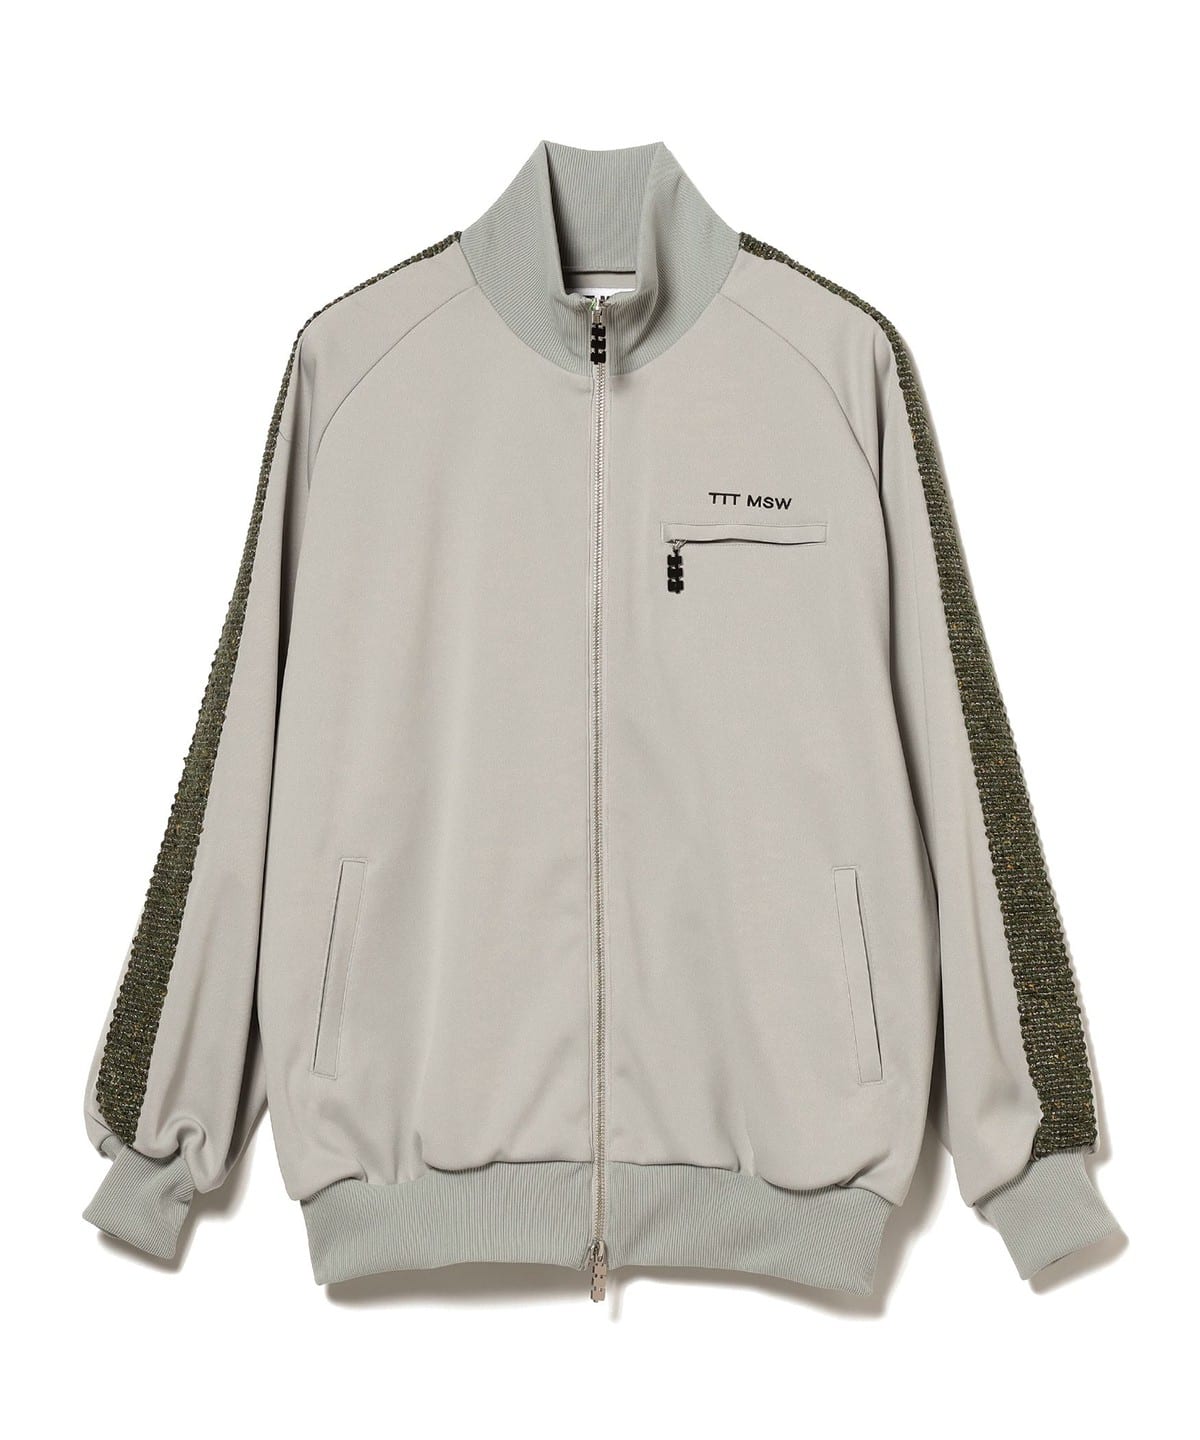 BEAMS（ビームス）TTTMSW / Track suit jacket（ブルゾン ブルゾン ...